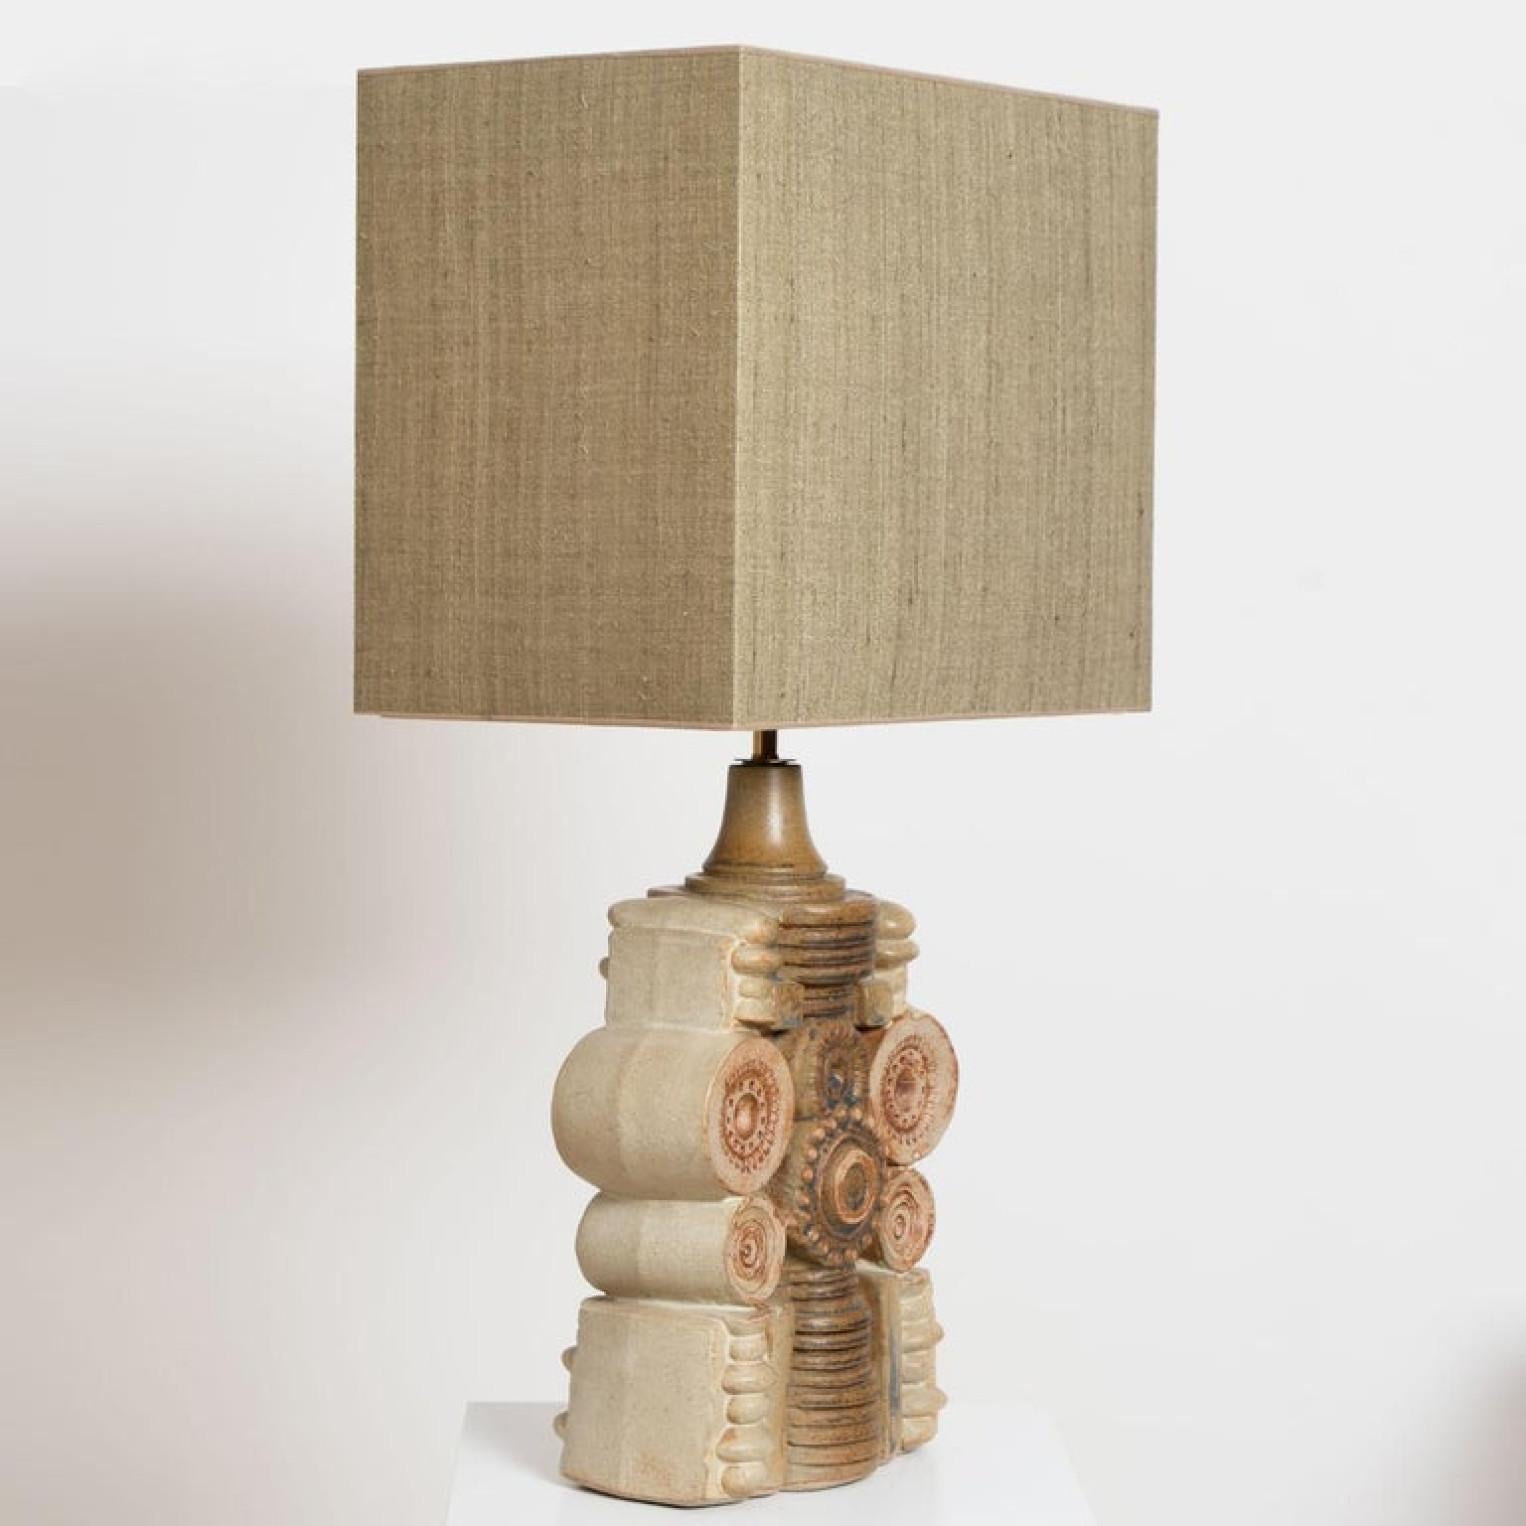 B. Rooke Ceramic Table Lamp with Custom Made Silk Lampshade René Houben, 1960s For Sale 7